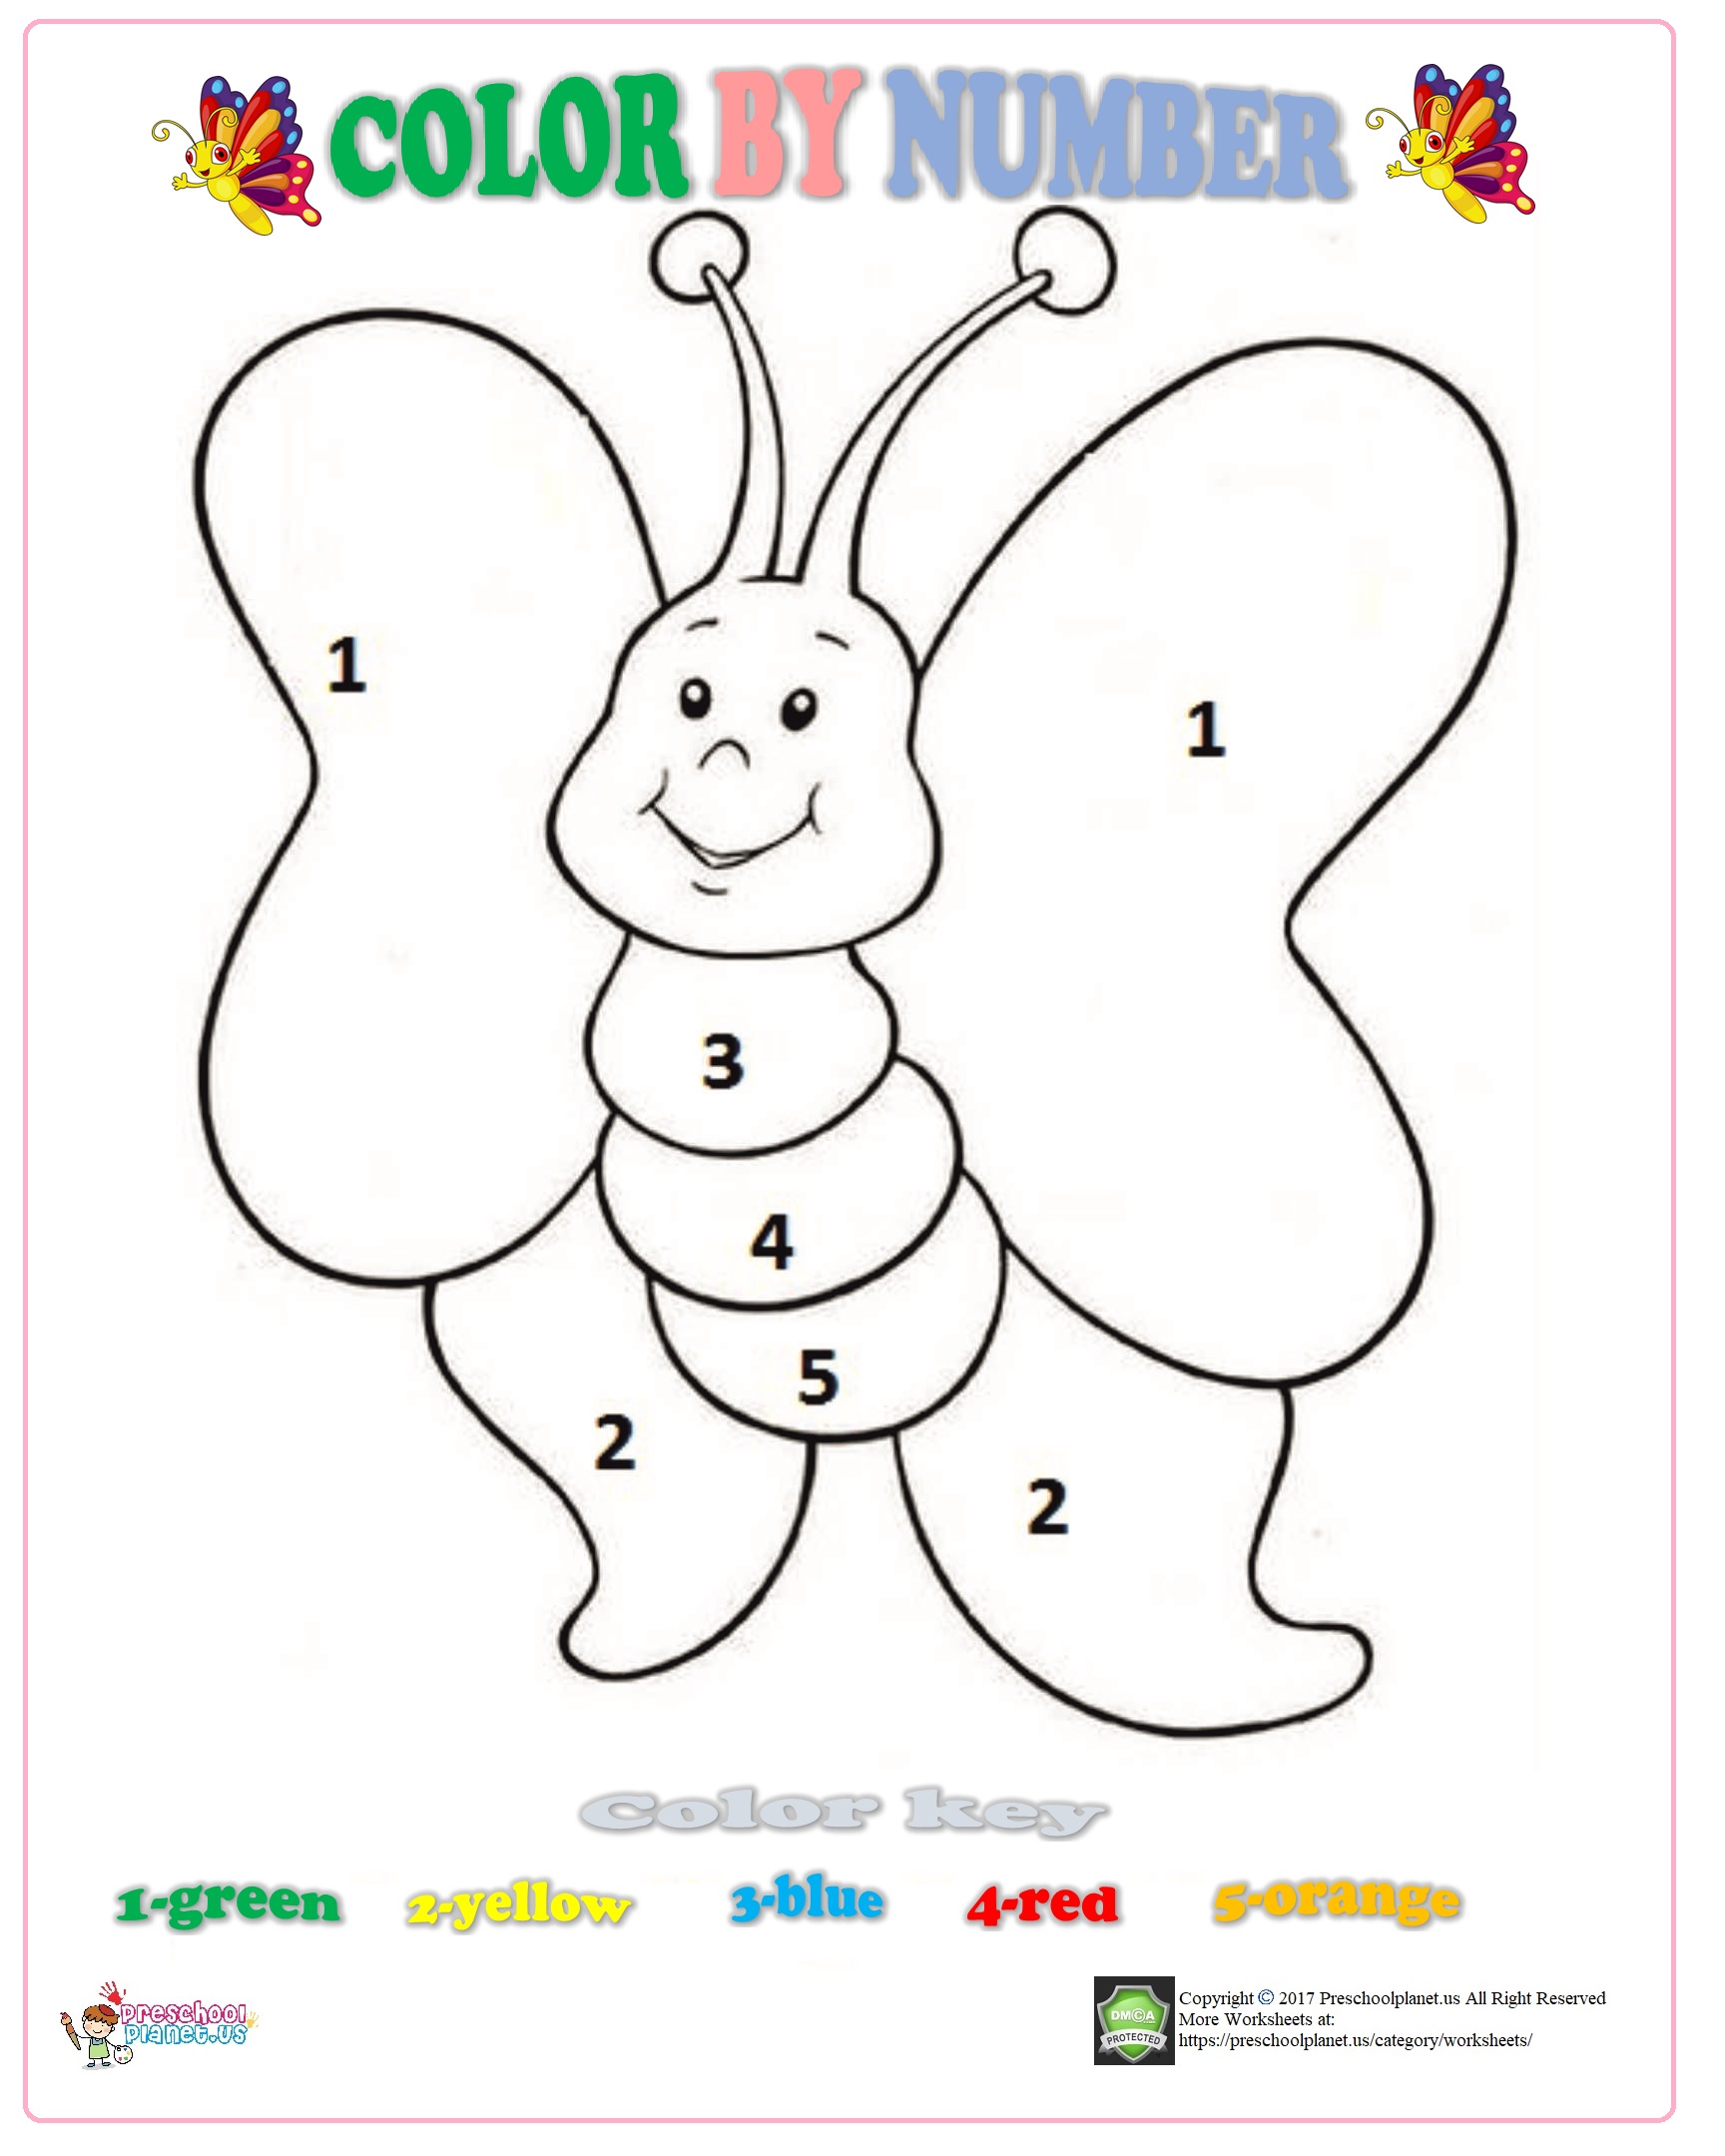 color by number butterfly worksheet